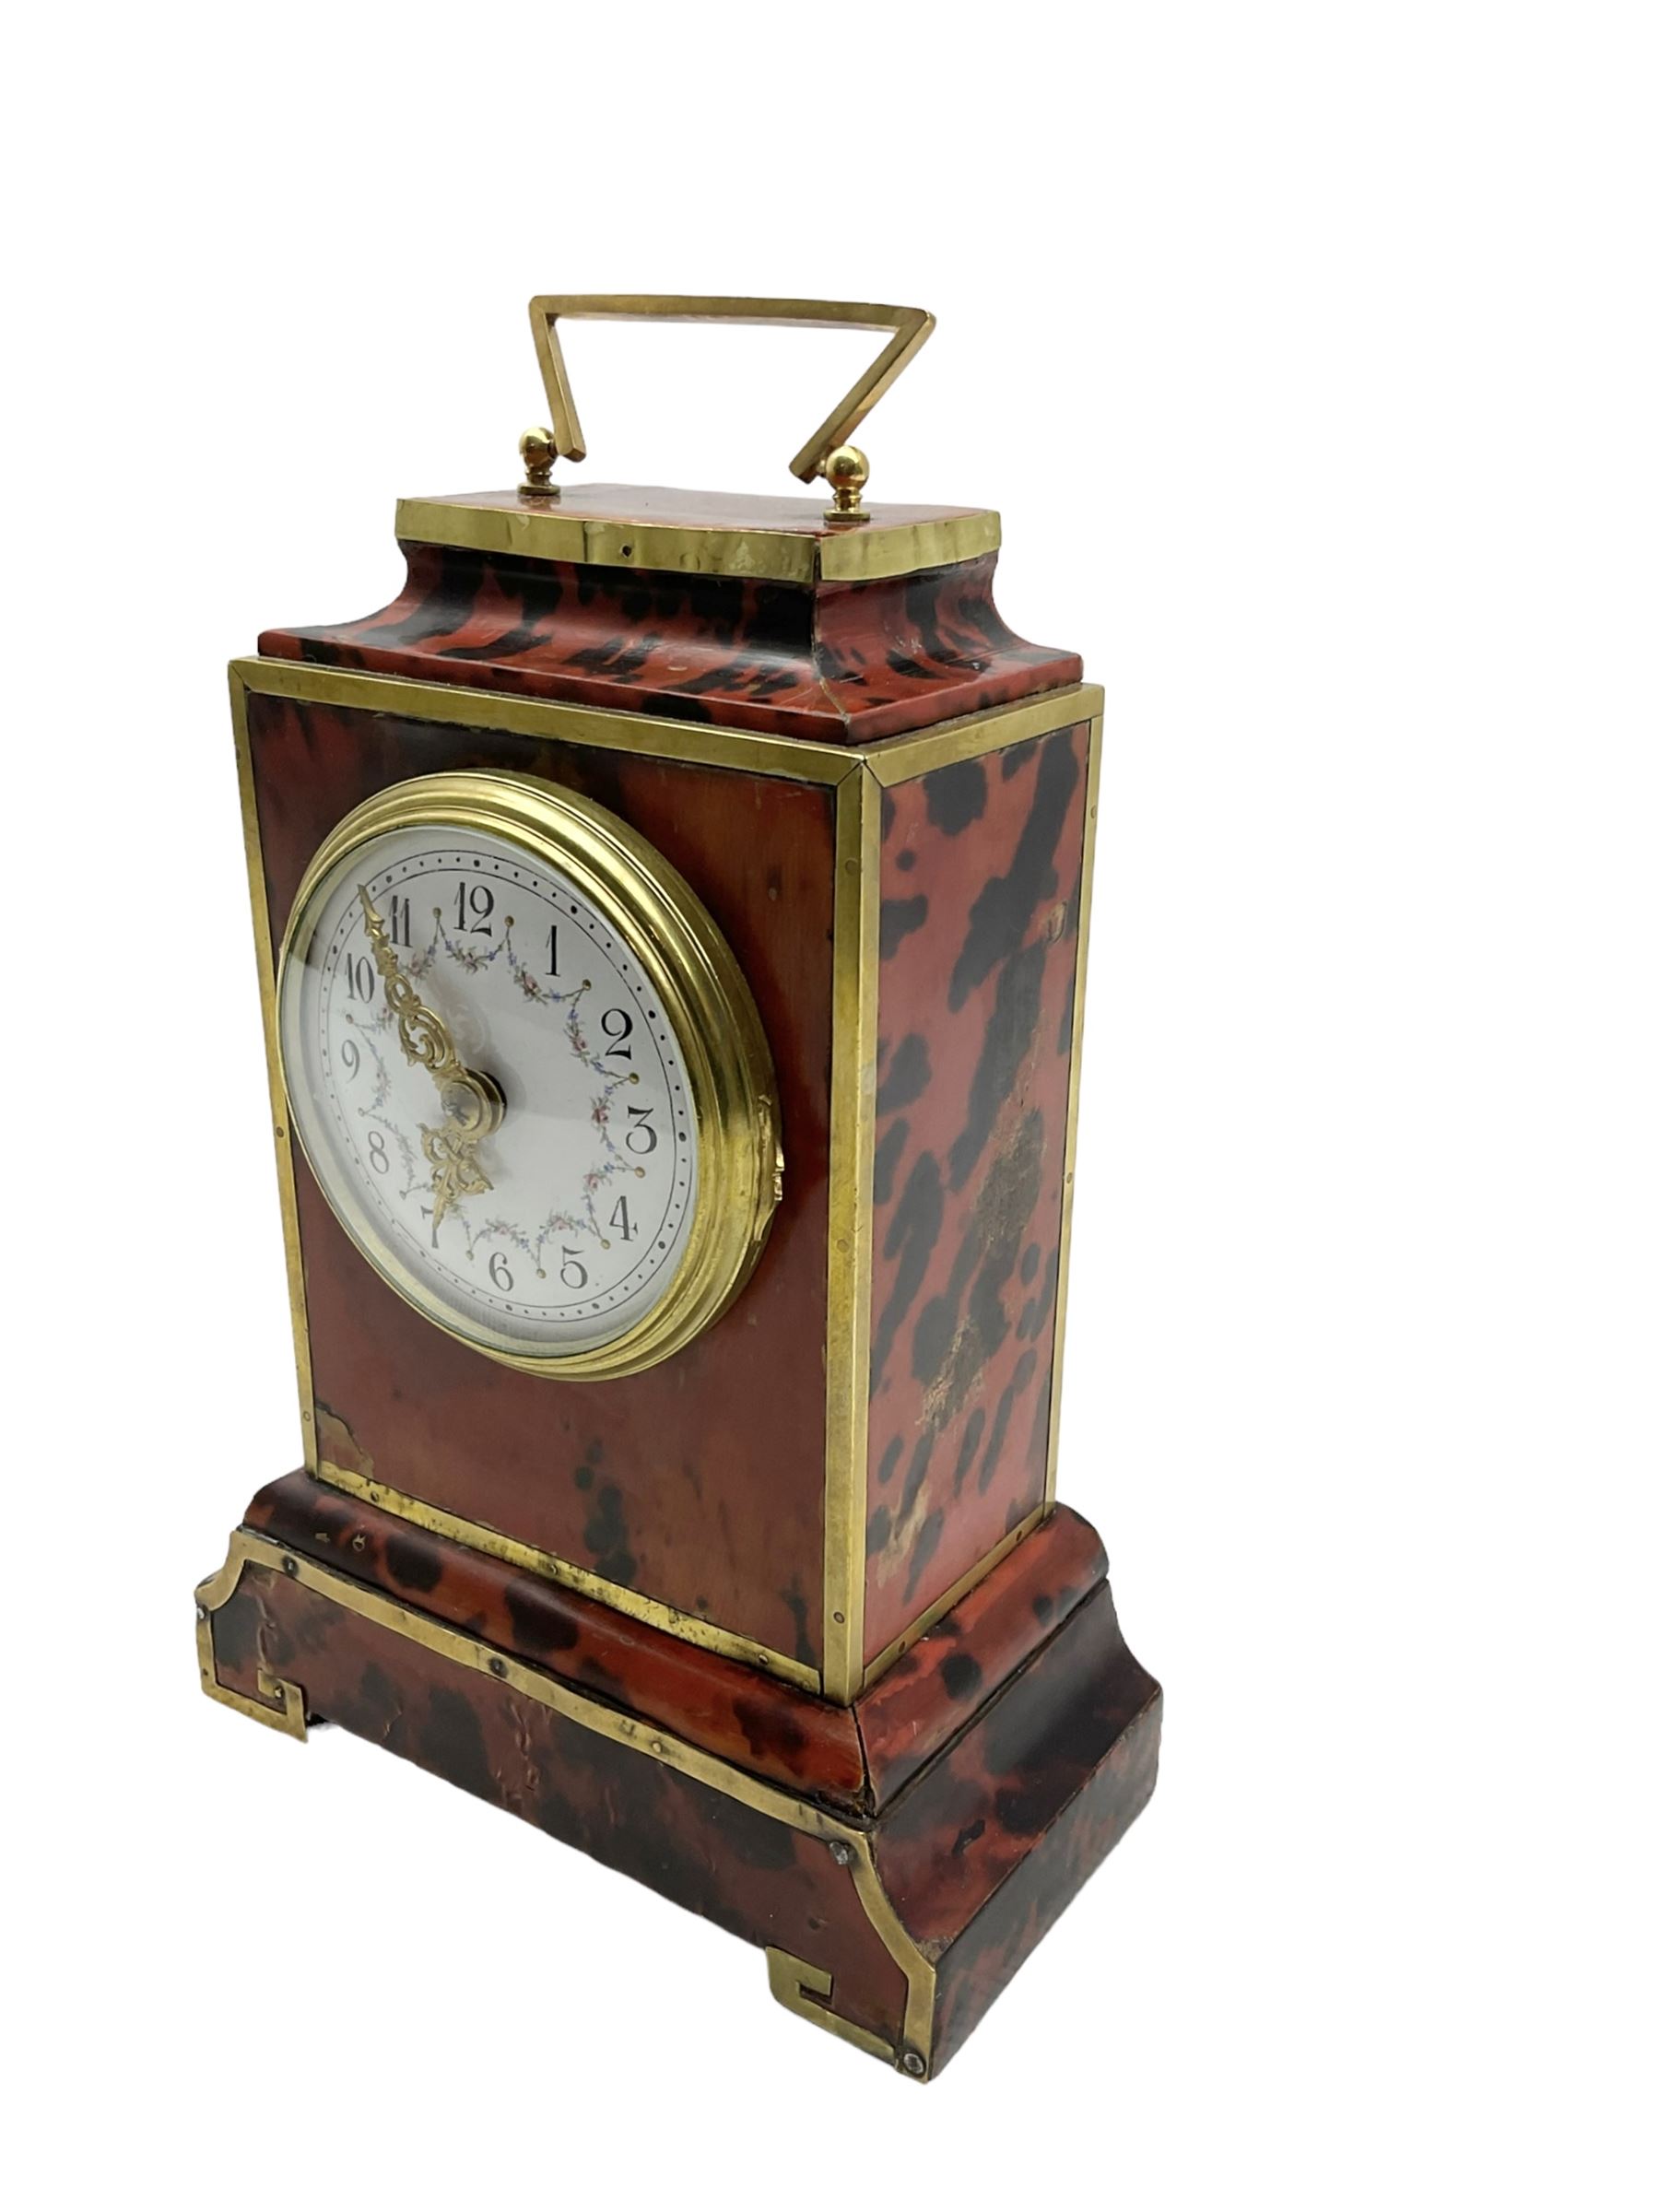 French - Early 20th century faux tortoiseshell mantle clock - Image 2 of 4